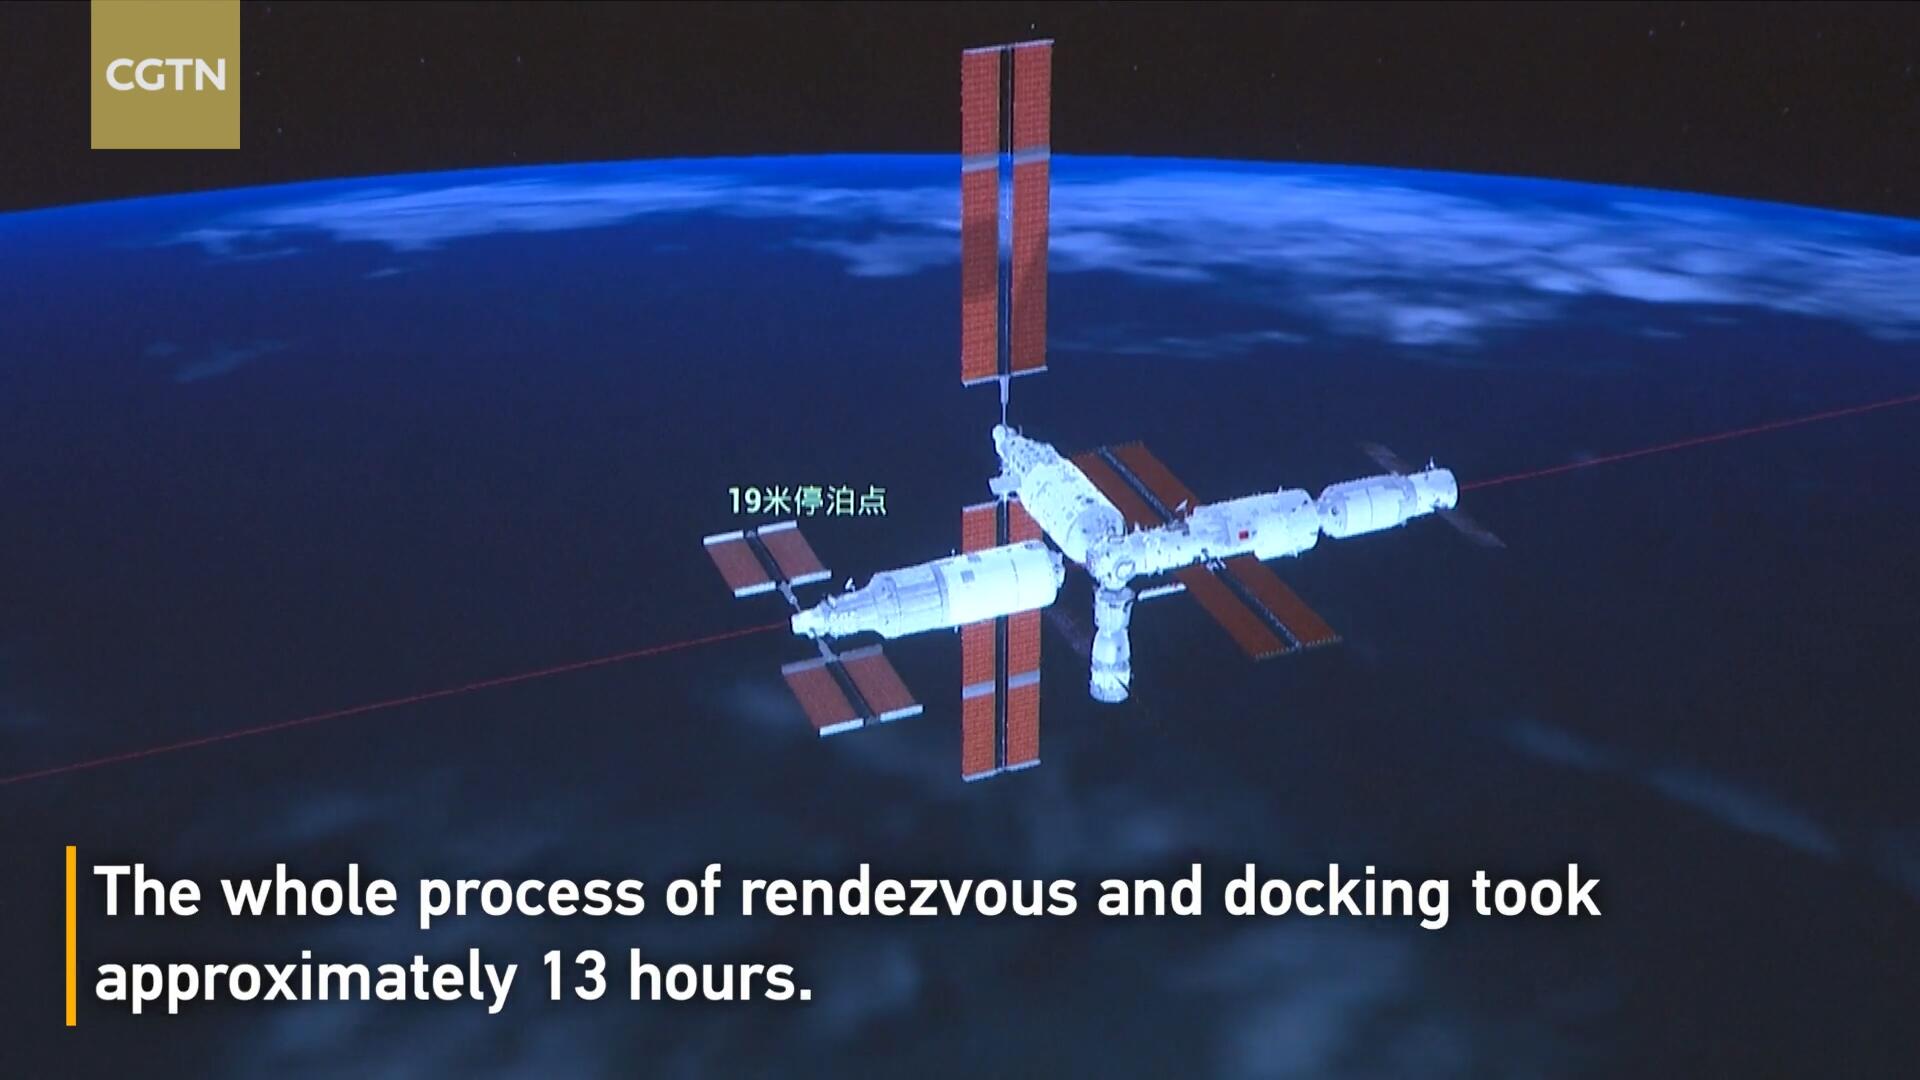 Mengtian Lab Module Docks with Core Module of China's Space Station